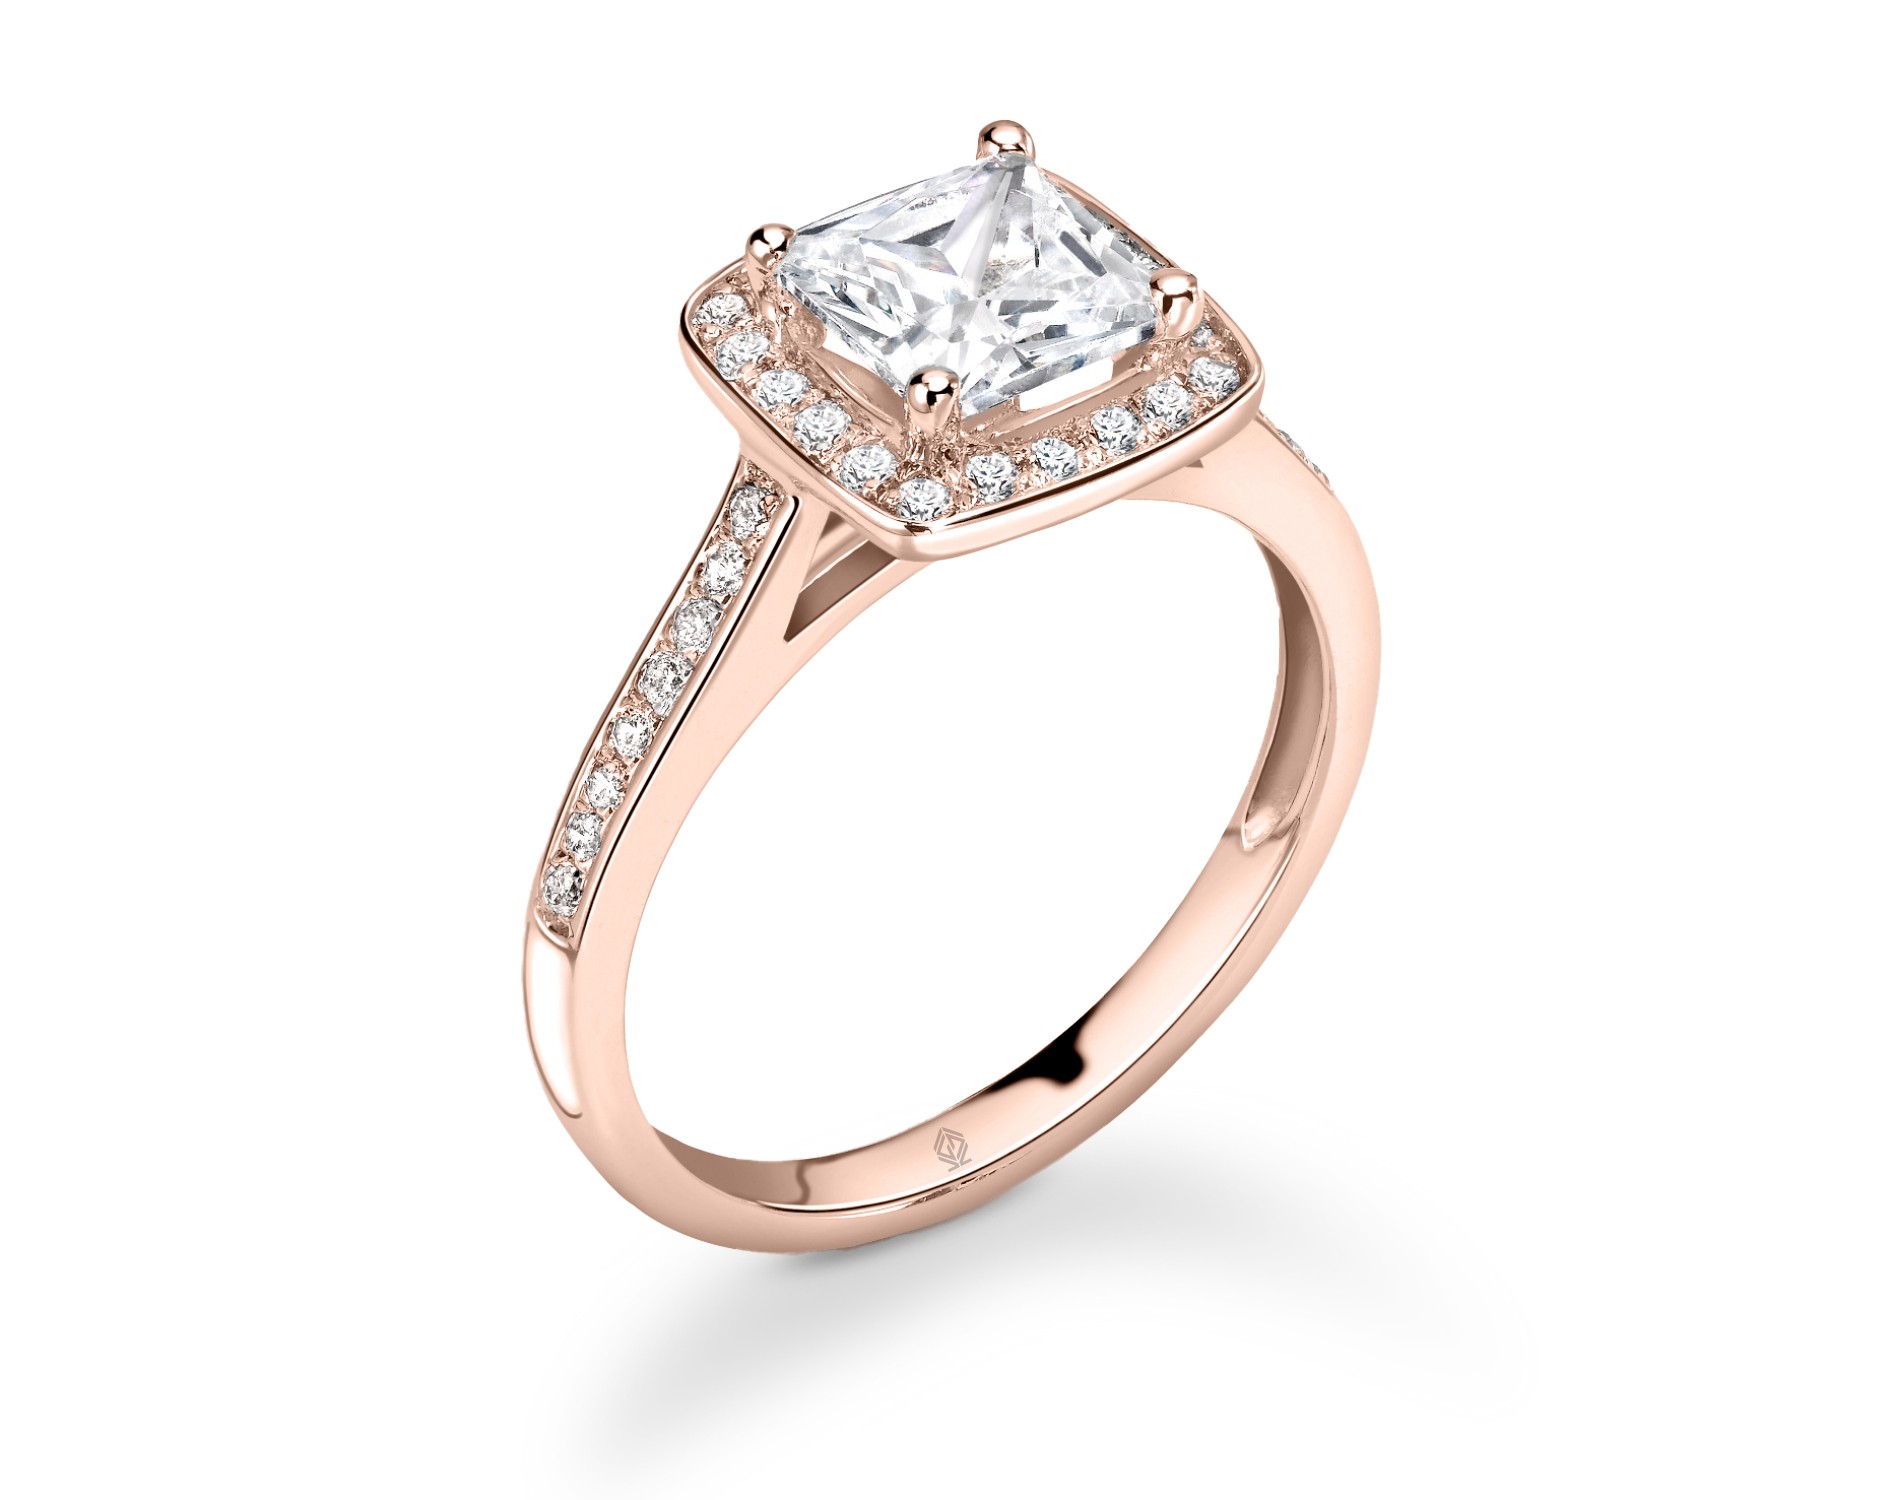 18K ROSE GOLD HALO PRINCESS CUT DIAMOND ENGAGEMENT RING WITH SIDE STONES CHANNEL SET